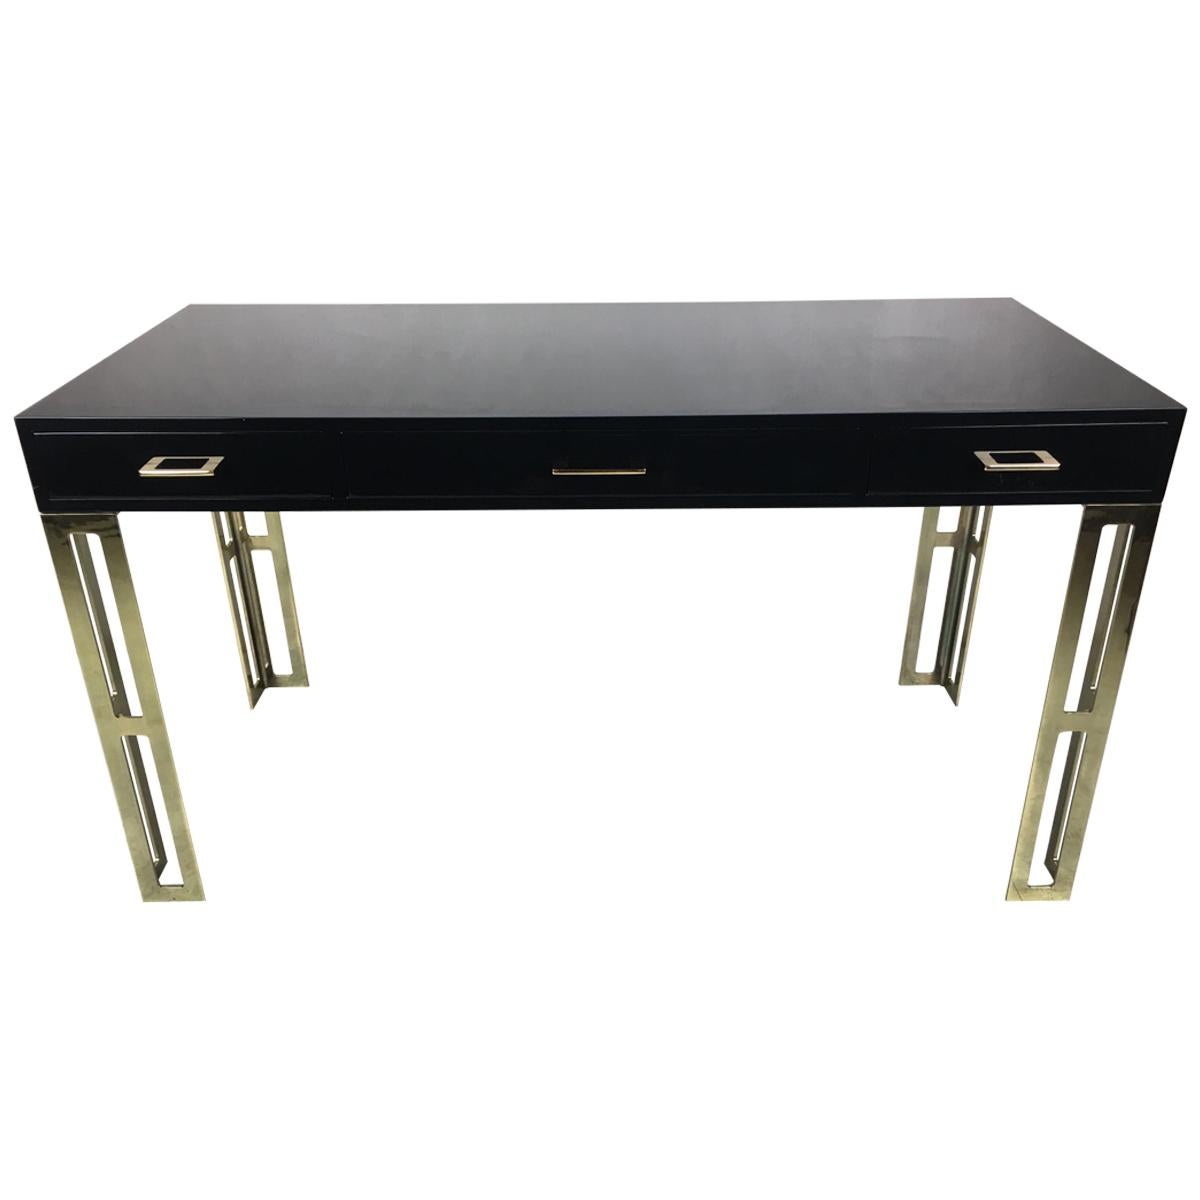 Black Lacquer Writing Table with Brass Legs and Hardware